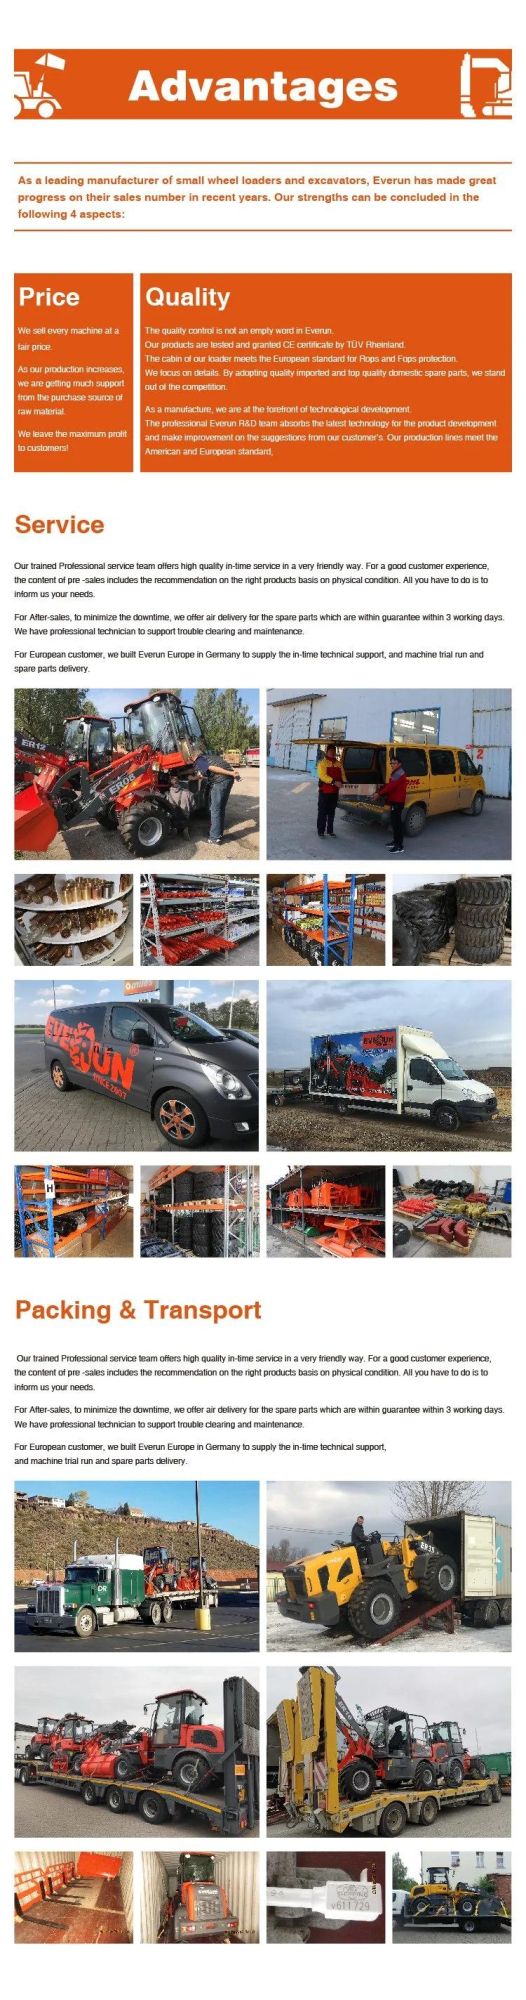 Hot Sale Chinese New Brand Everun ERES2030G 2000kg Farm Use Mini Battery Pallet Stacker